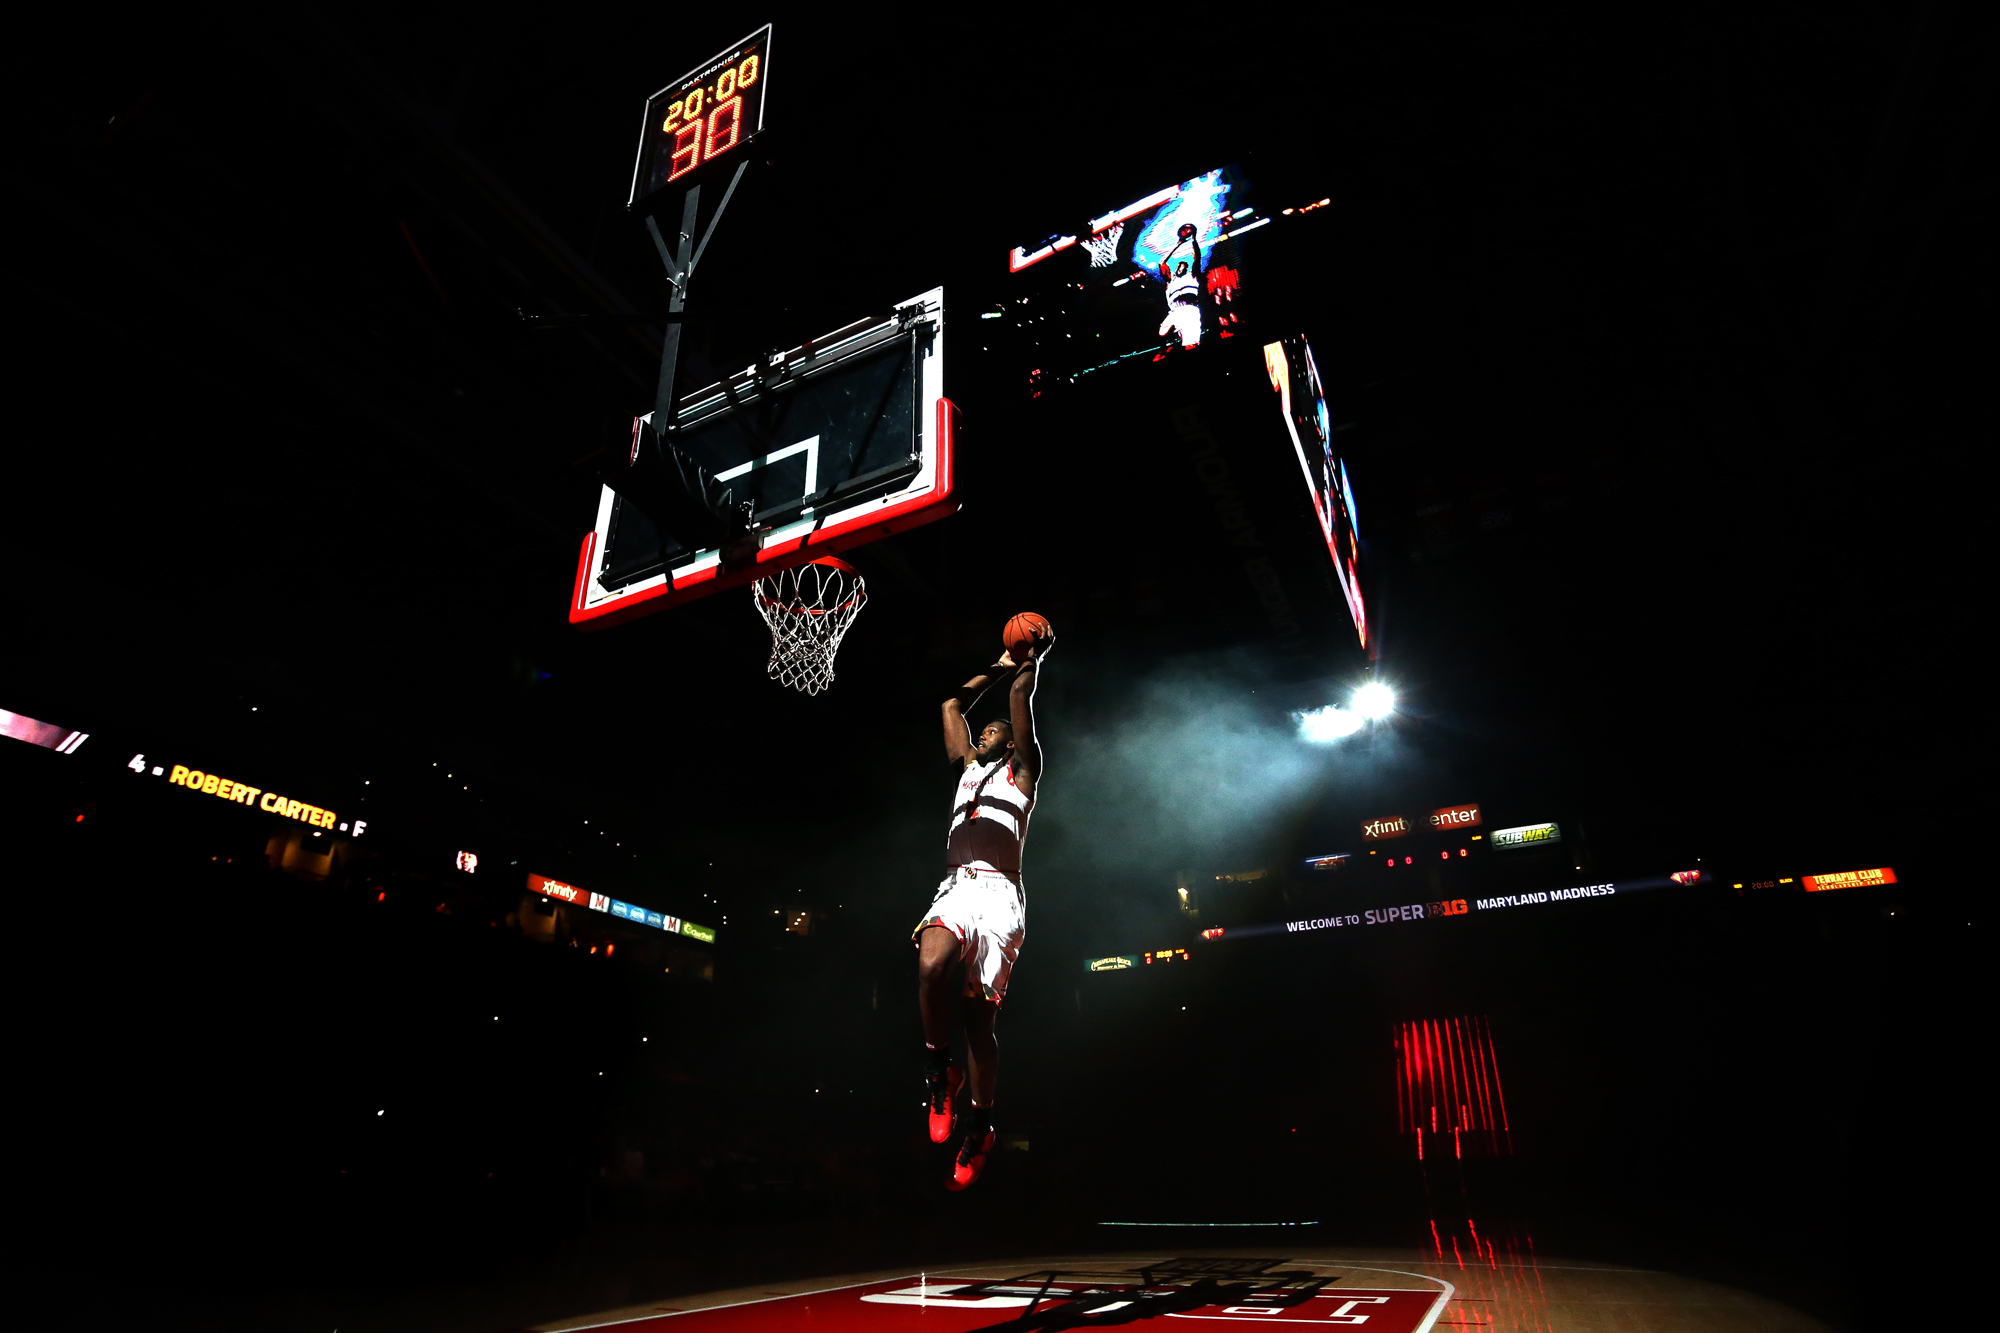  Robert Carter of University of Maryland dunks after being introduced during Maryland Madness at Xfinity Center in College Park on Friday, Oct. 17, 2014.&nbsp; 